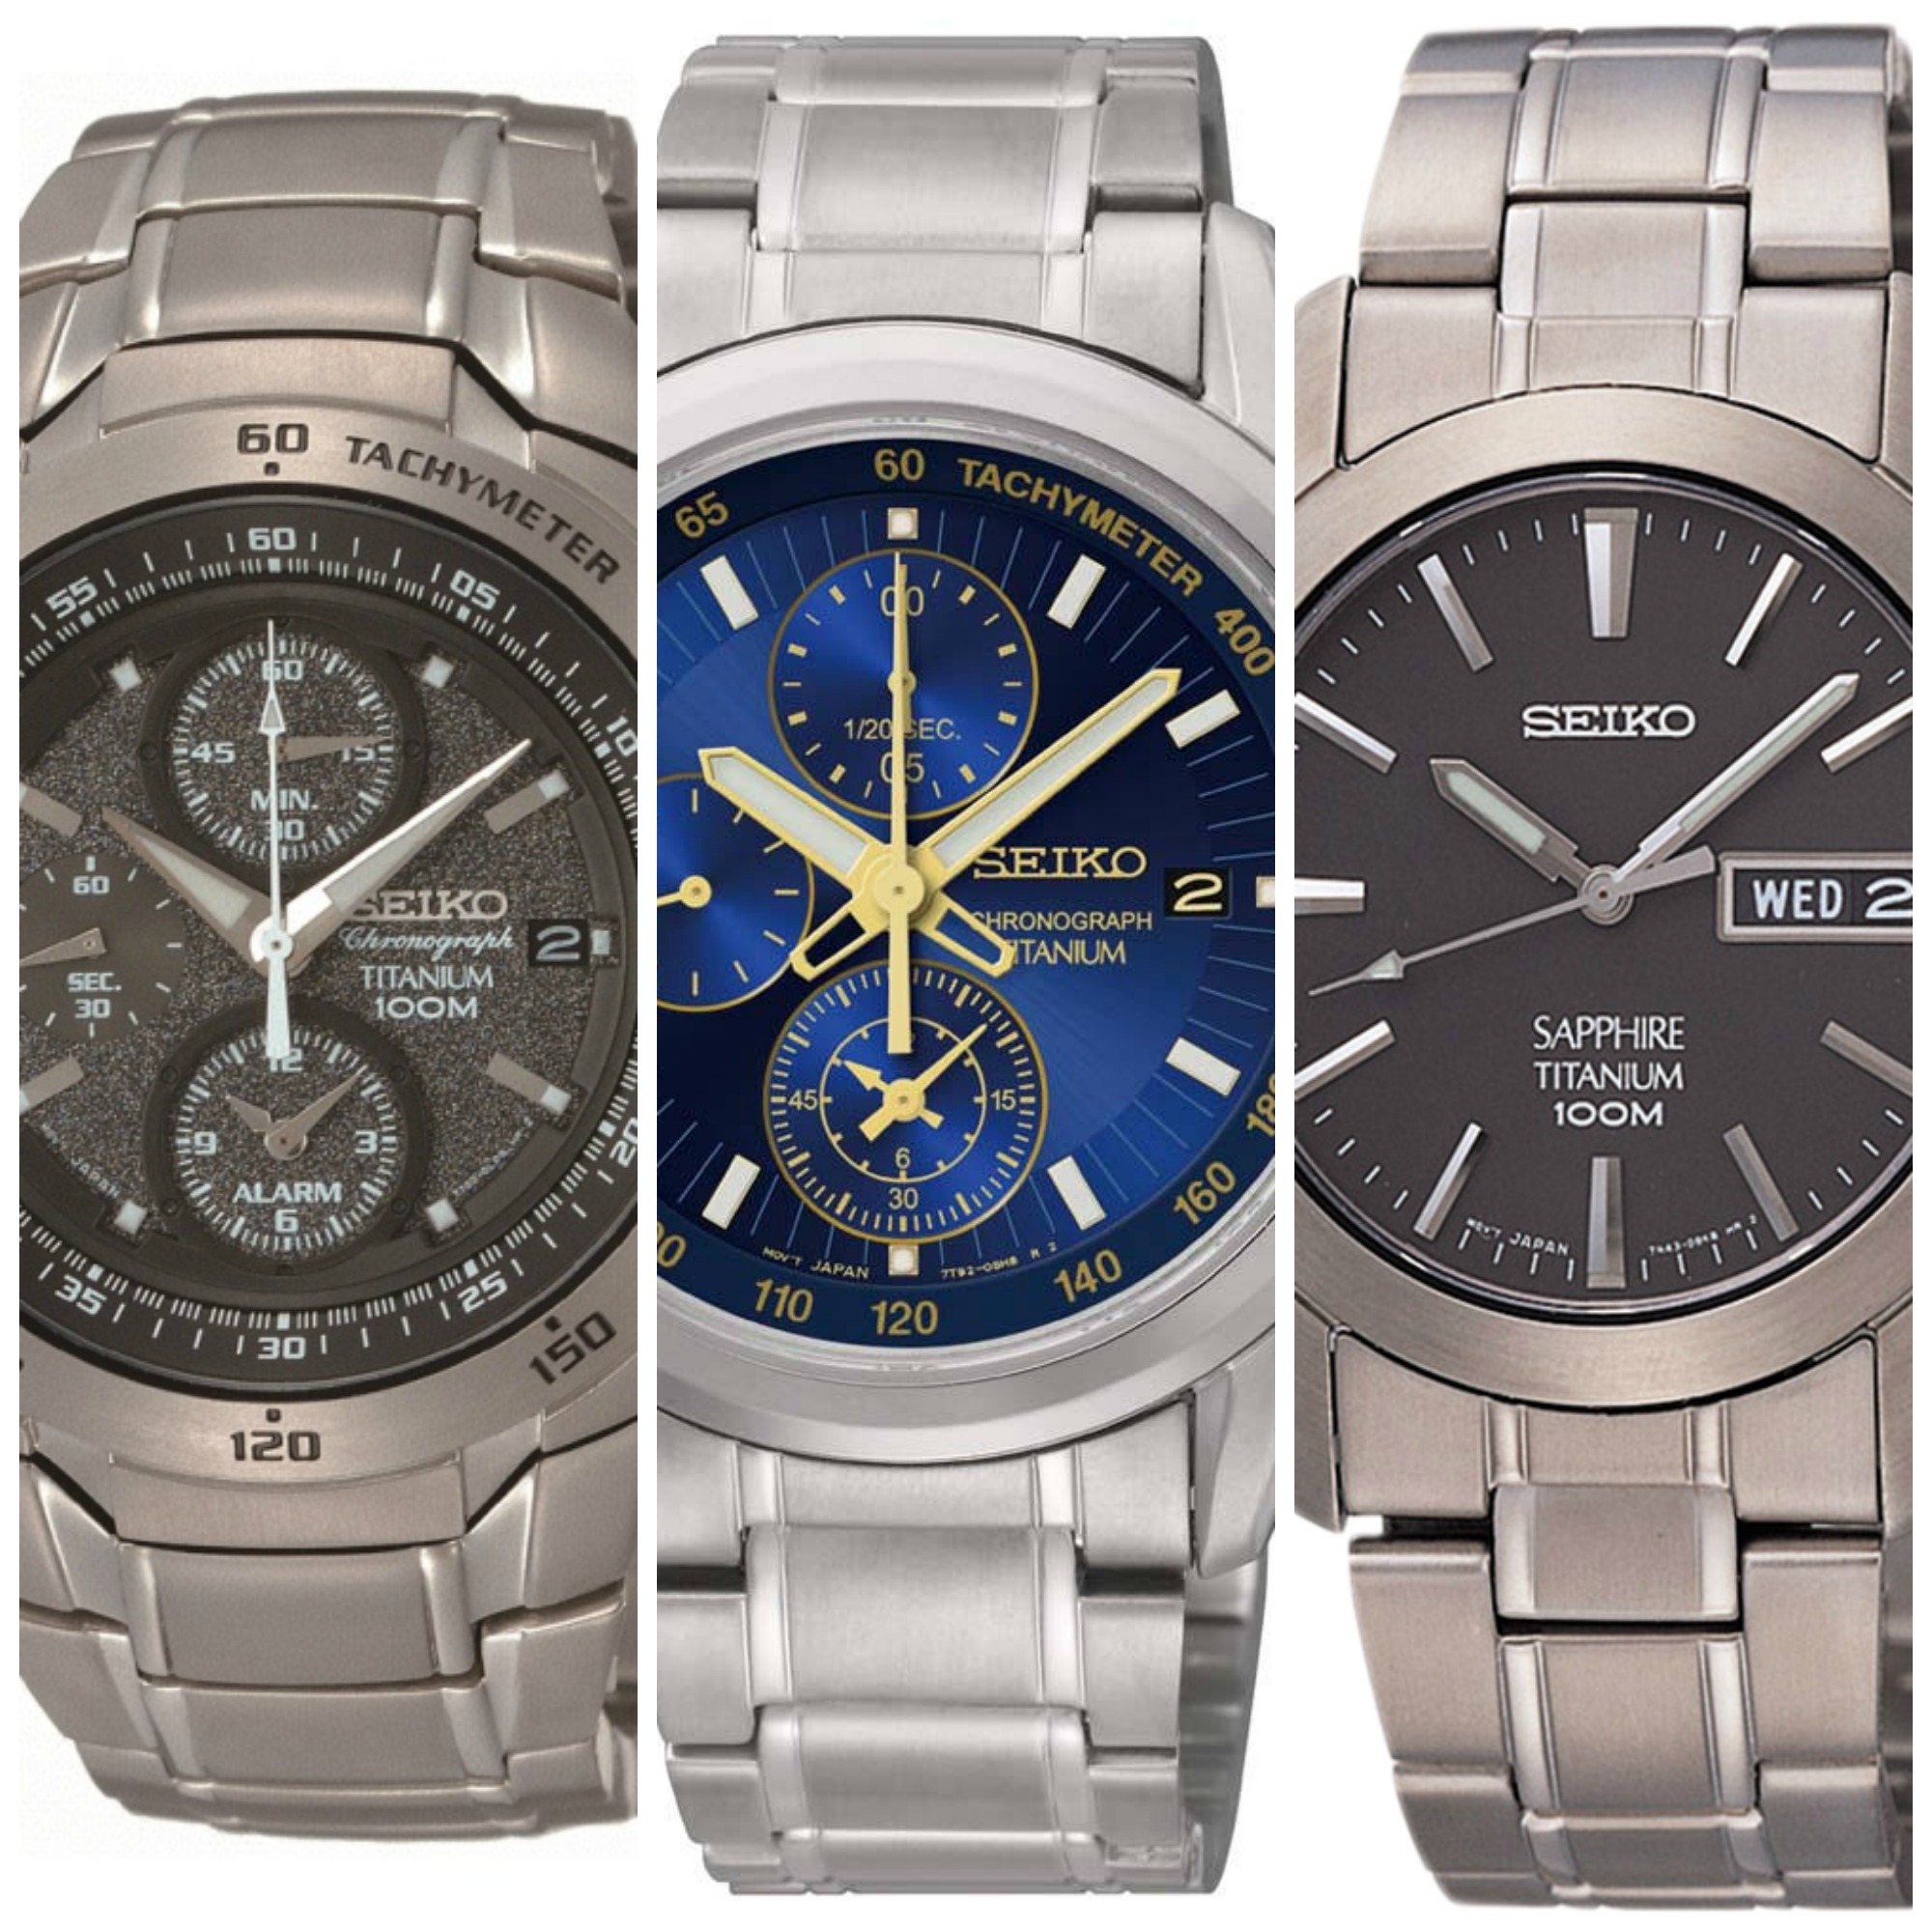 Top 9 Most Popular Titanium Seiko Watches | Best Buy For Men - The ...